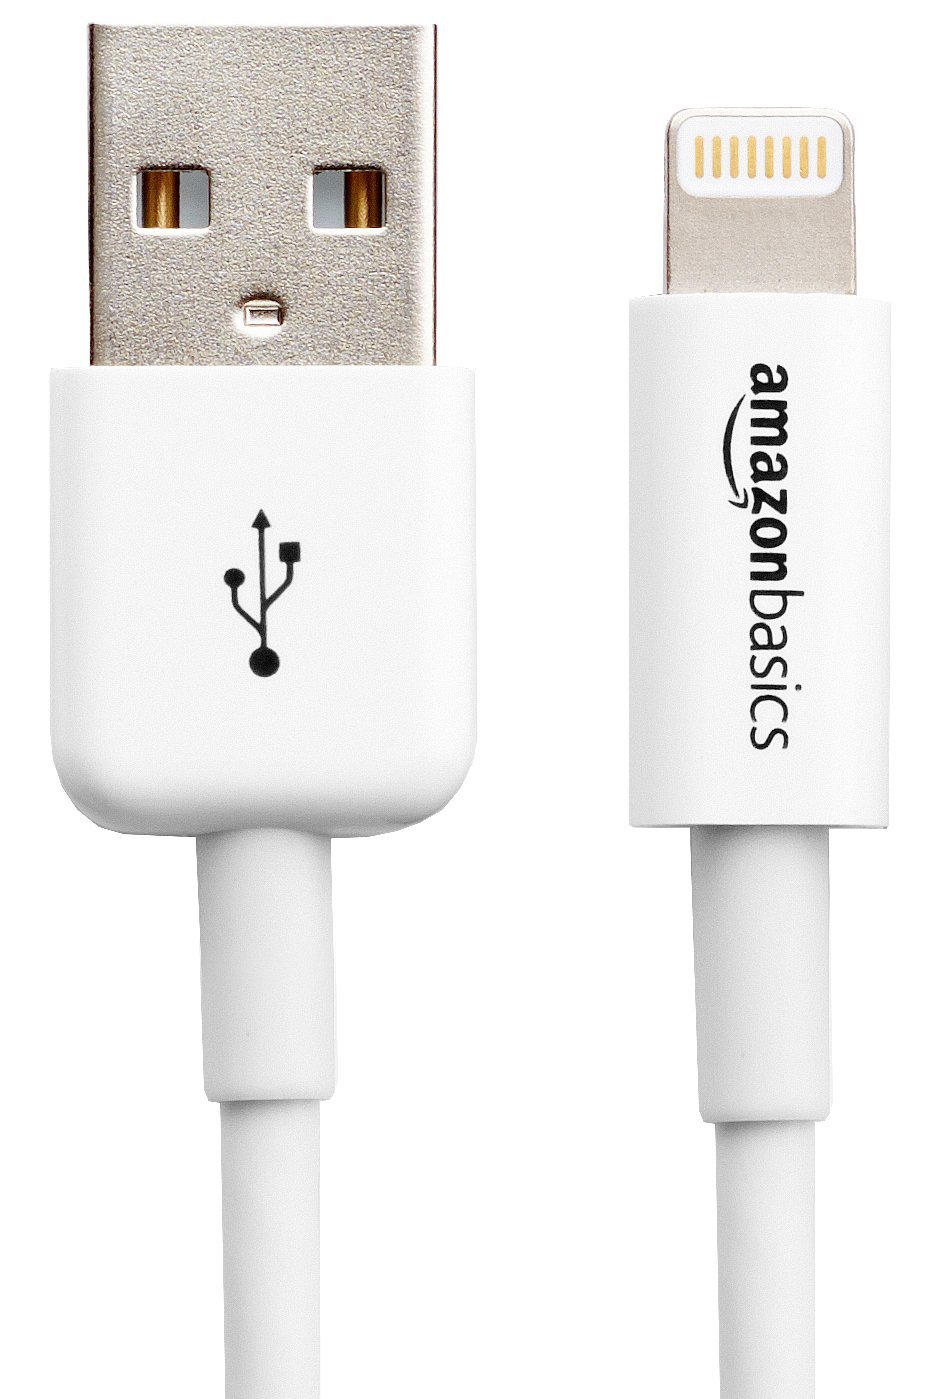 AmazonBasics 6 Feet Apple Certified Lightning to USB Cable – Just $7.99!